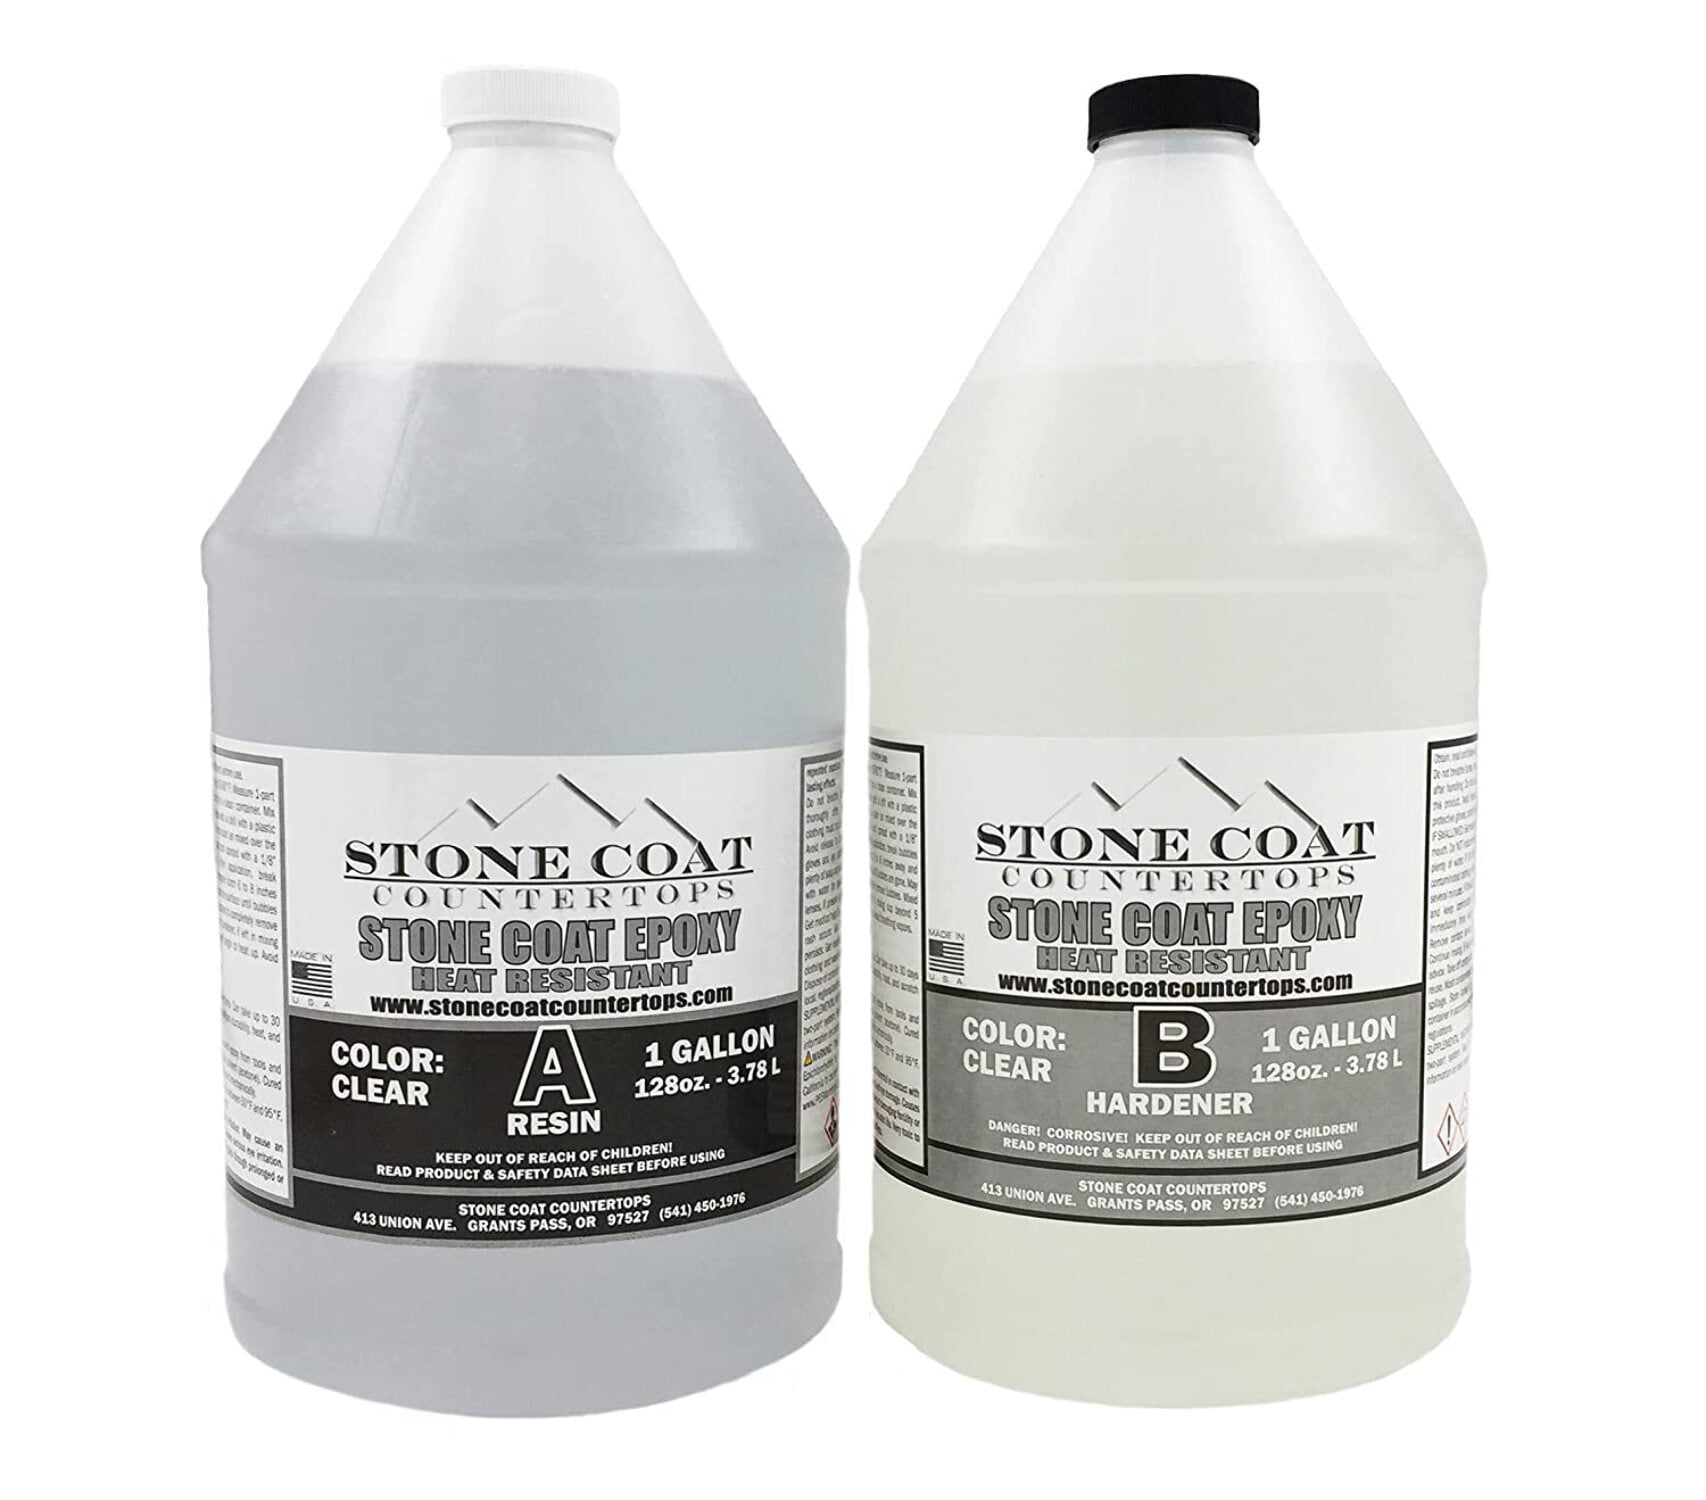 Stone Coat Countertops (1/2 Gallon) Epoxy Resin Kit for DIY Projects,  Kitchens, Bathrooms, Counters, Tables, Wood Slabs, and More! Heat Resistant  and